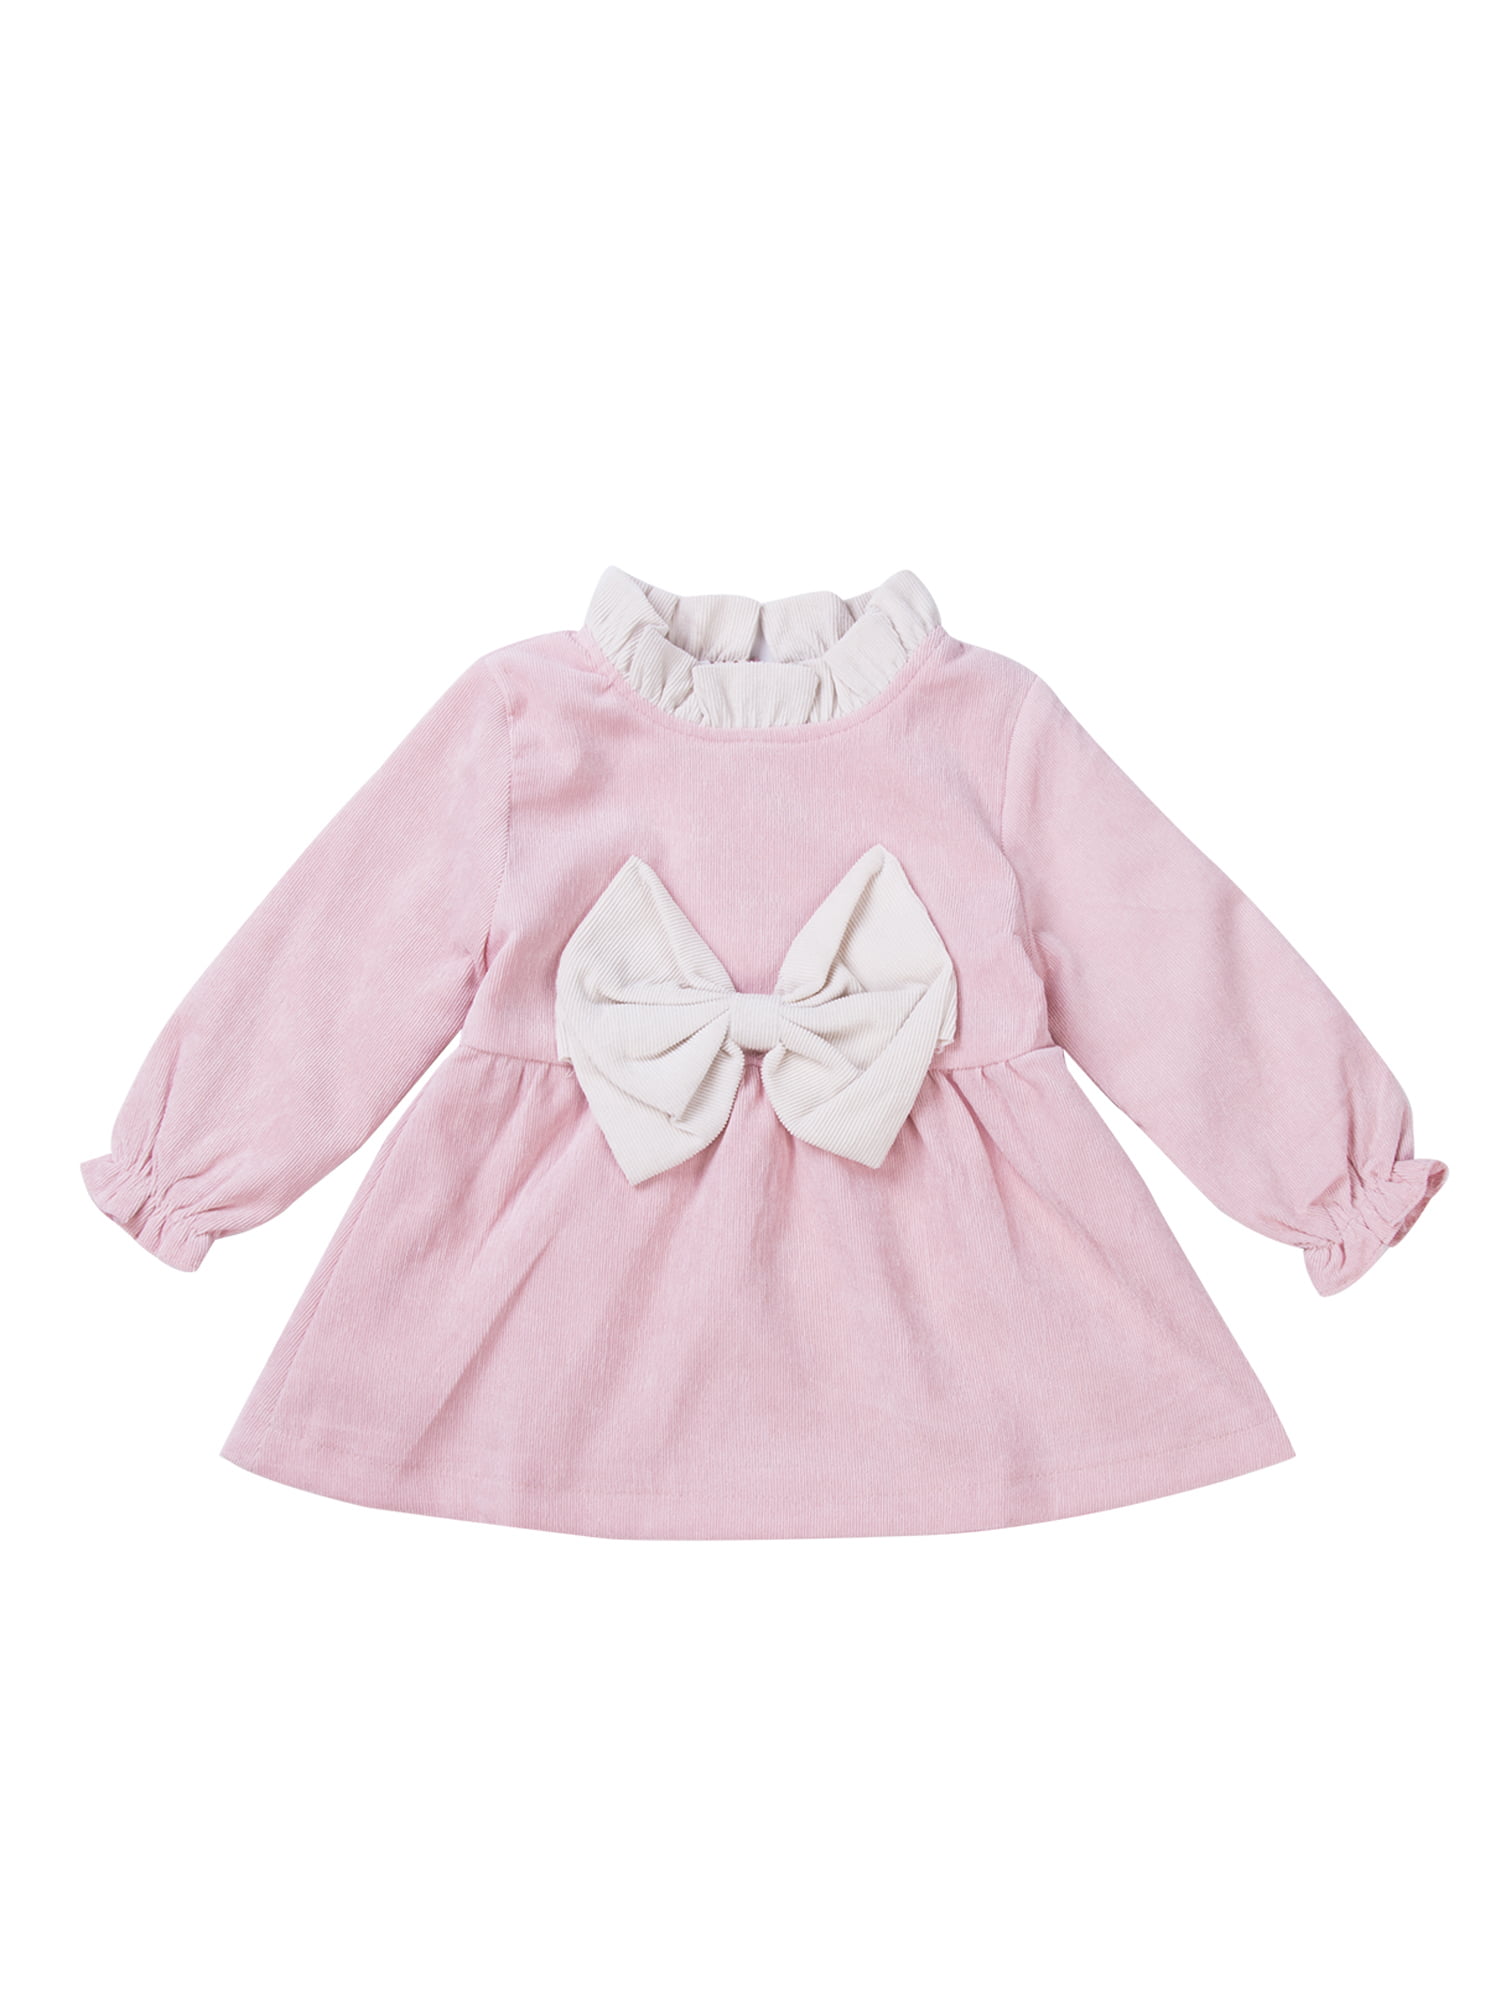 Details about   Toddler Dresses Party Clothes Baby Girls Long Sleeve Cat Stripe Zipper Princess